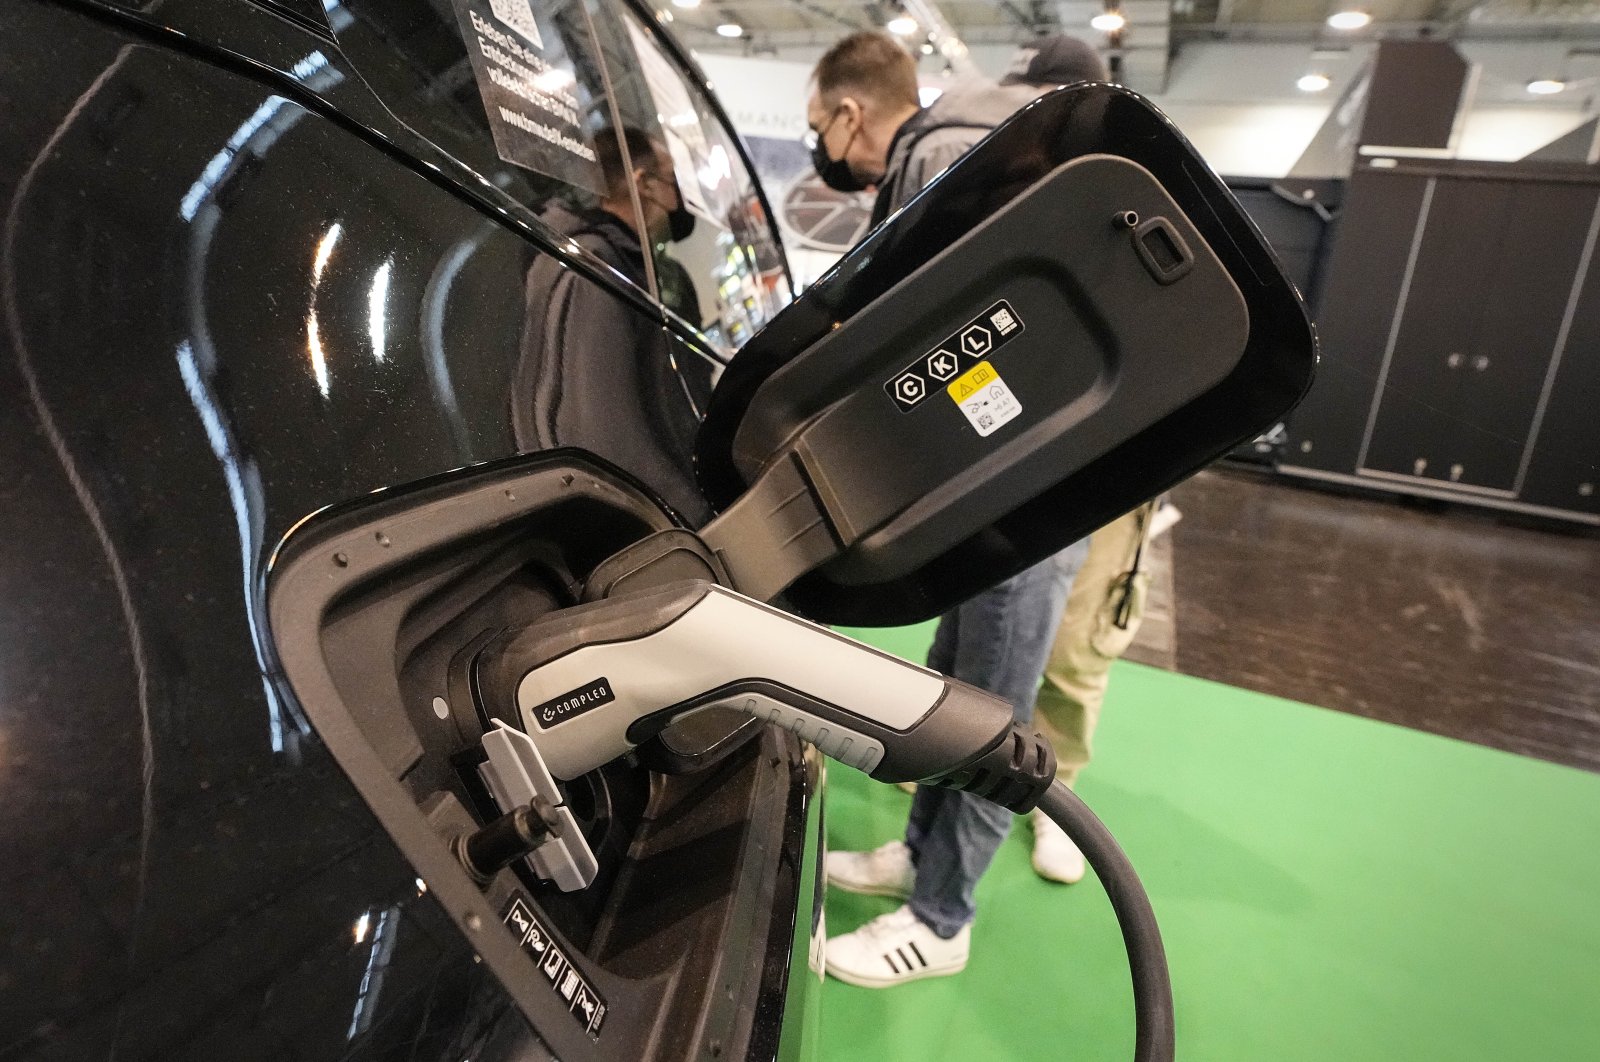 The new fully electric car BMW iX is charged at the Motor Show in Essen, Germany, Dec. 2, 2021. (AP Photo)